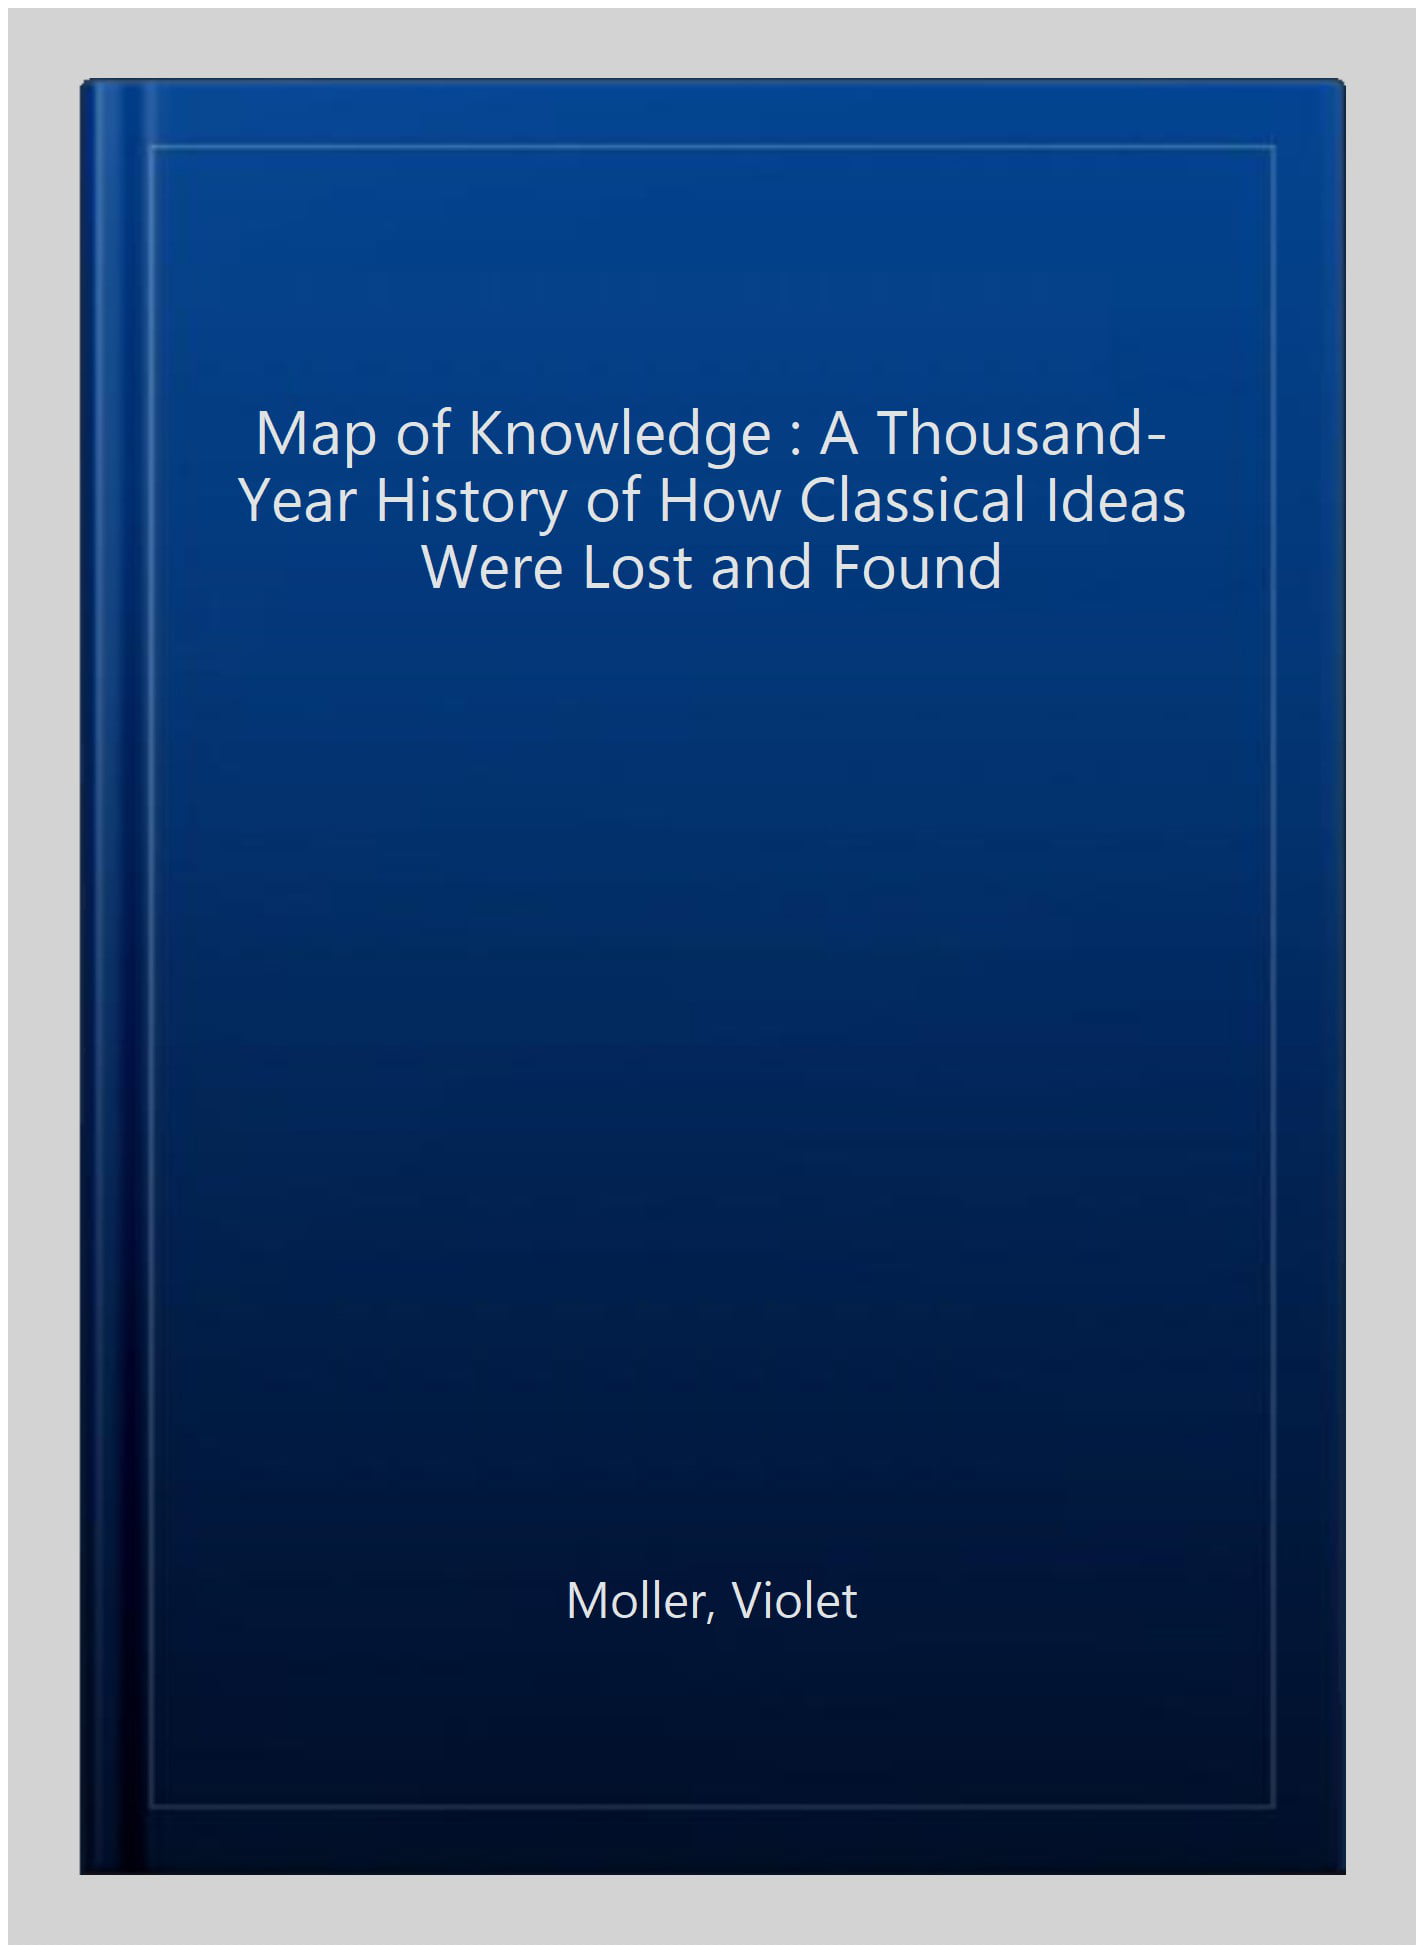 The Map of Knowledge: A Thousand-Year by Moller, Violet